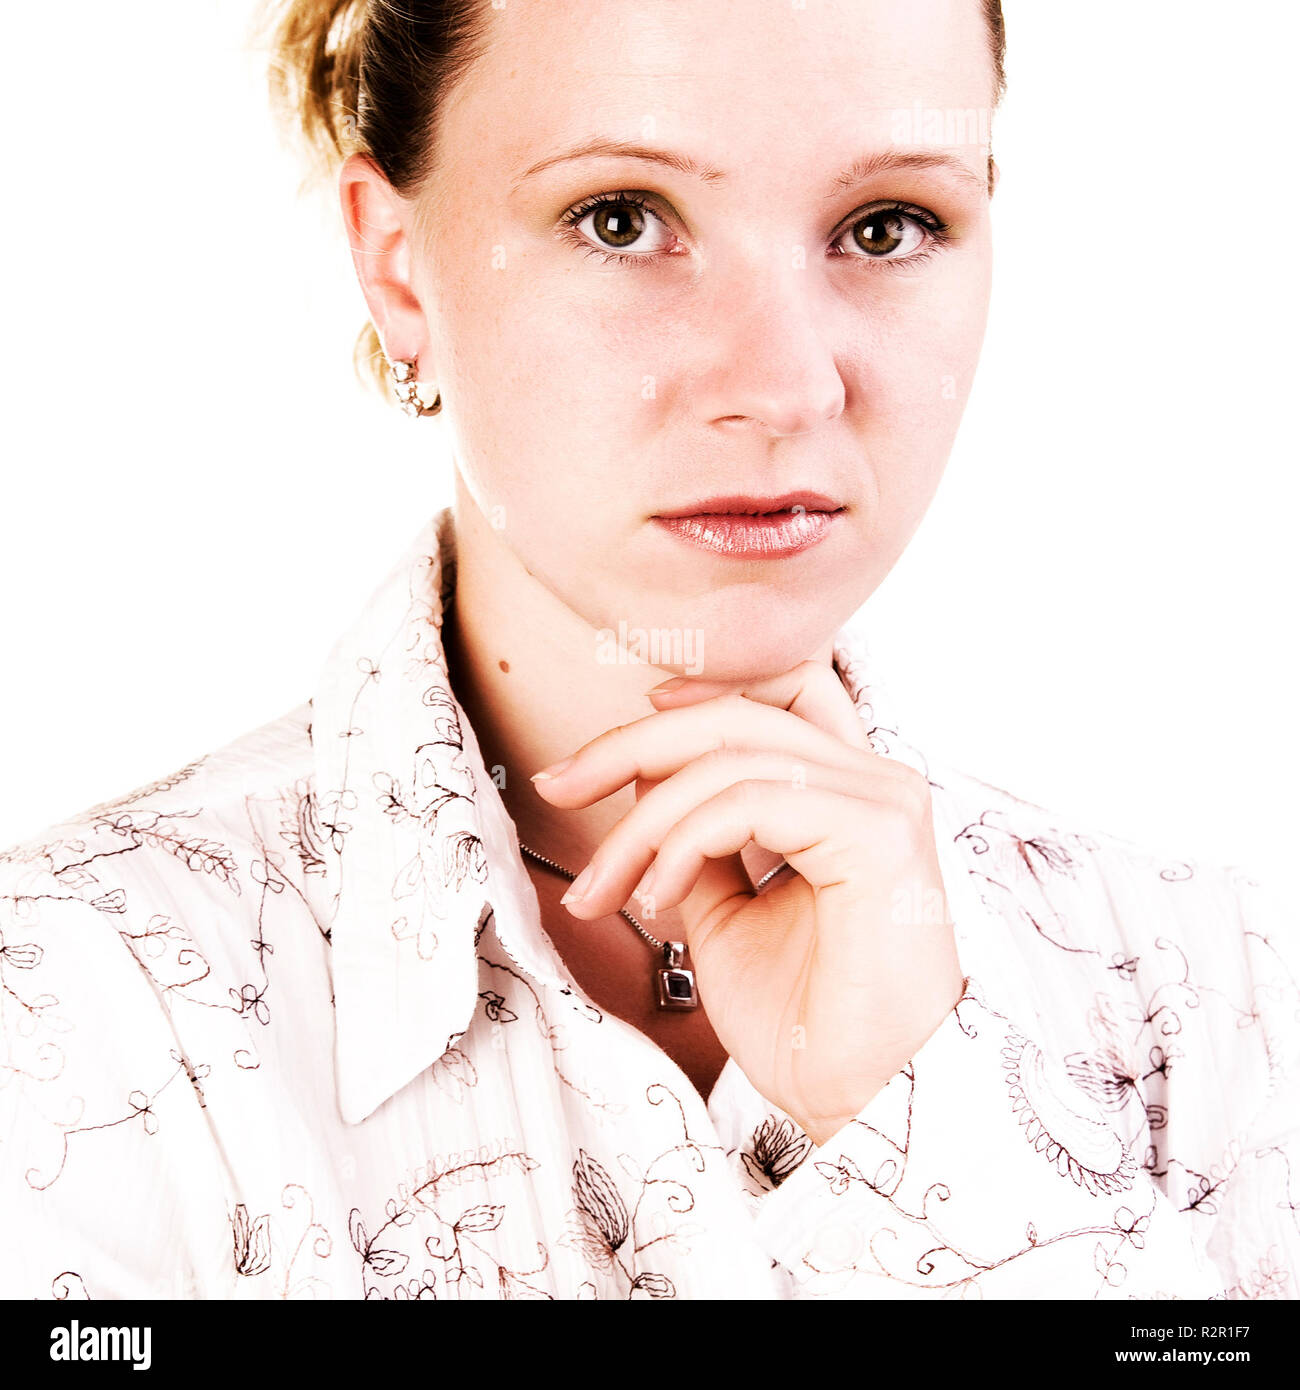 portrait young woman Stock Photo